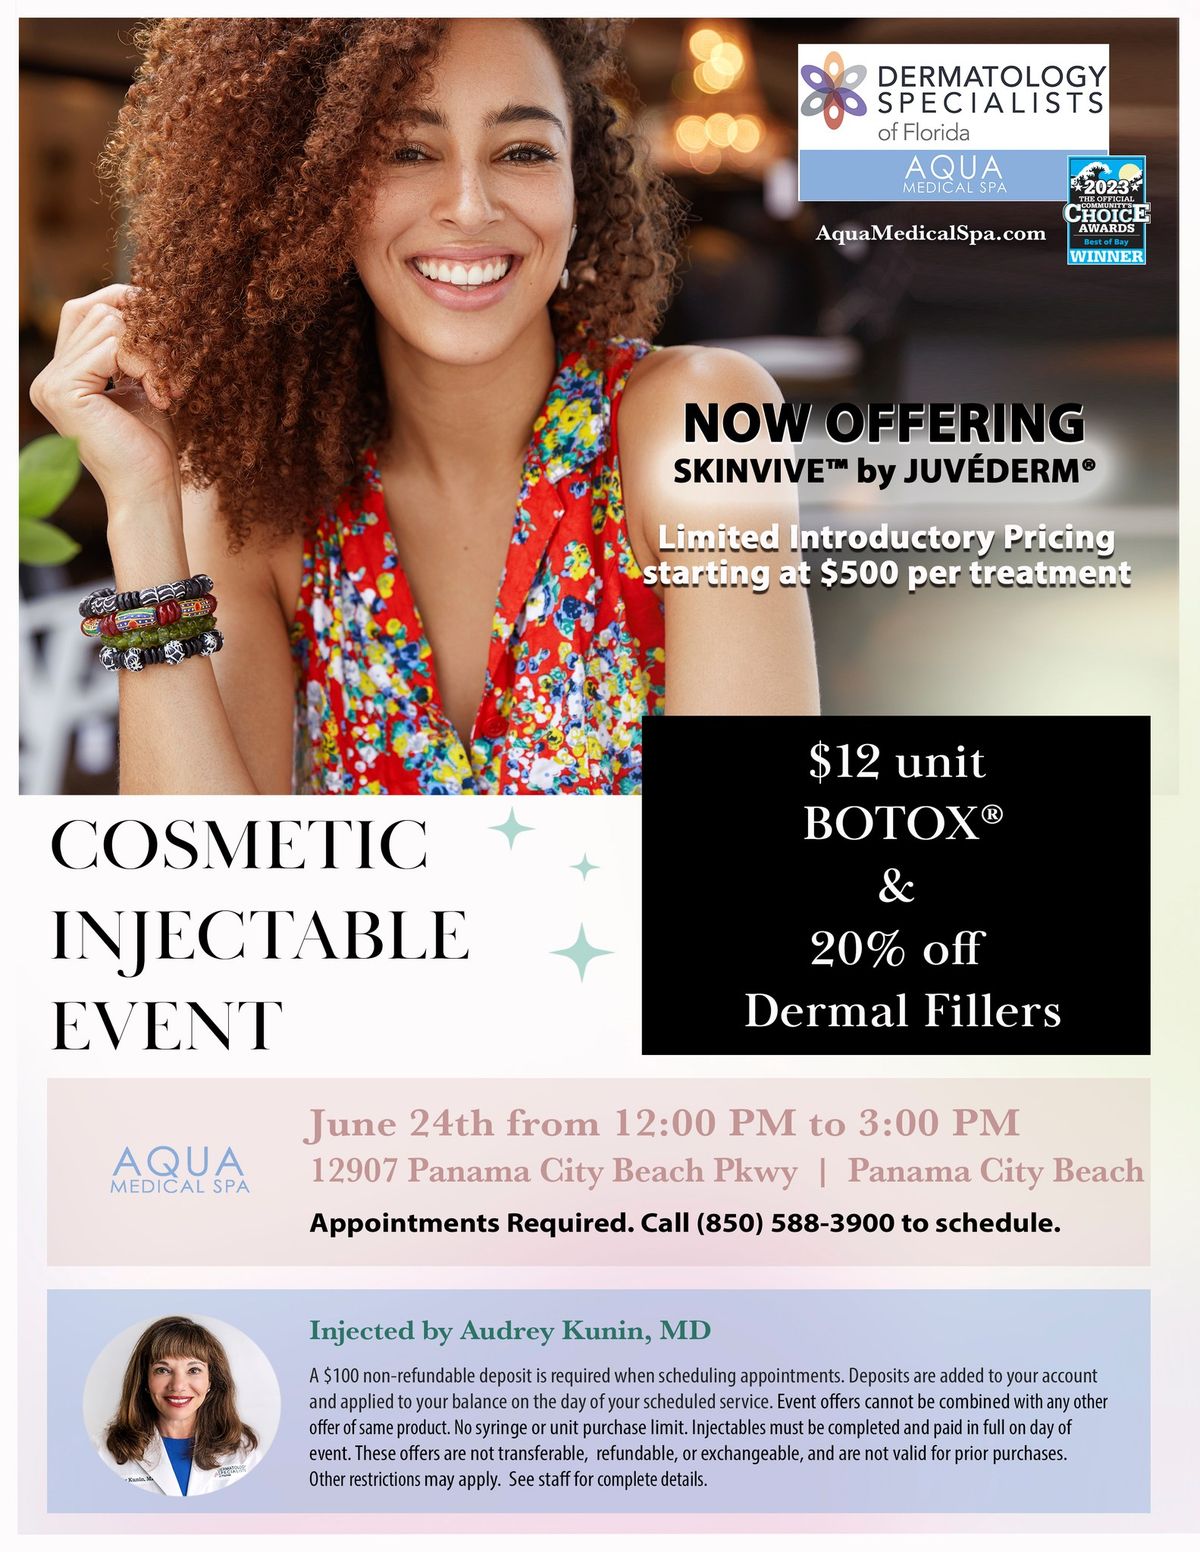 Cosmetic Injectable Event - Panama City Beach